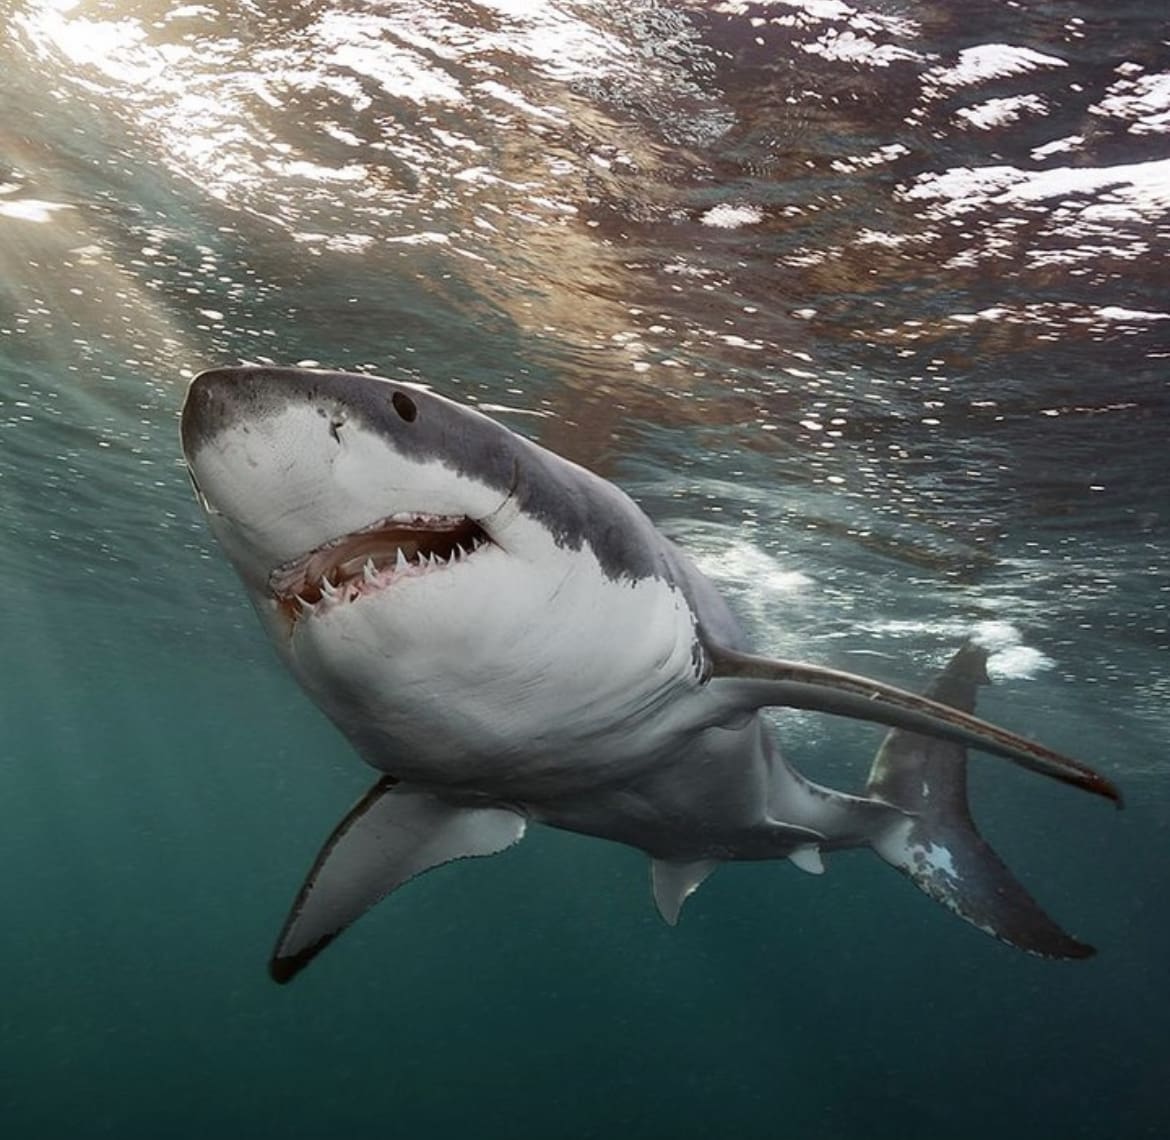 A Great White Shark swims through surface waters in the waters off South Australia